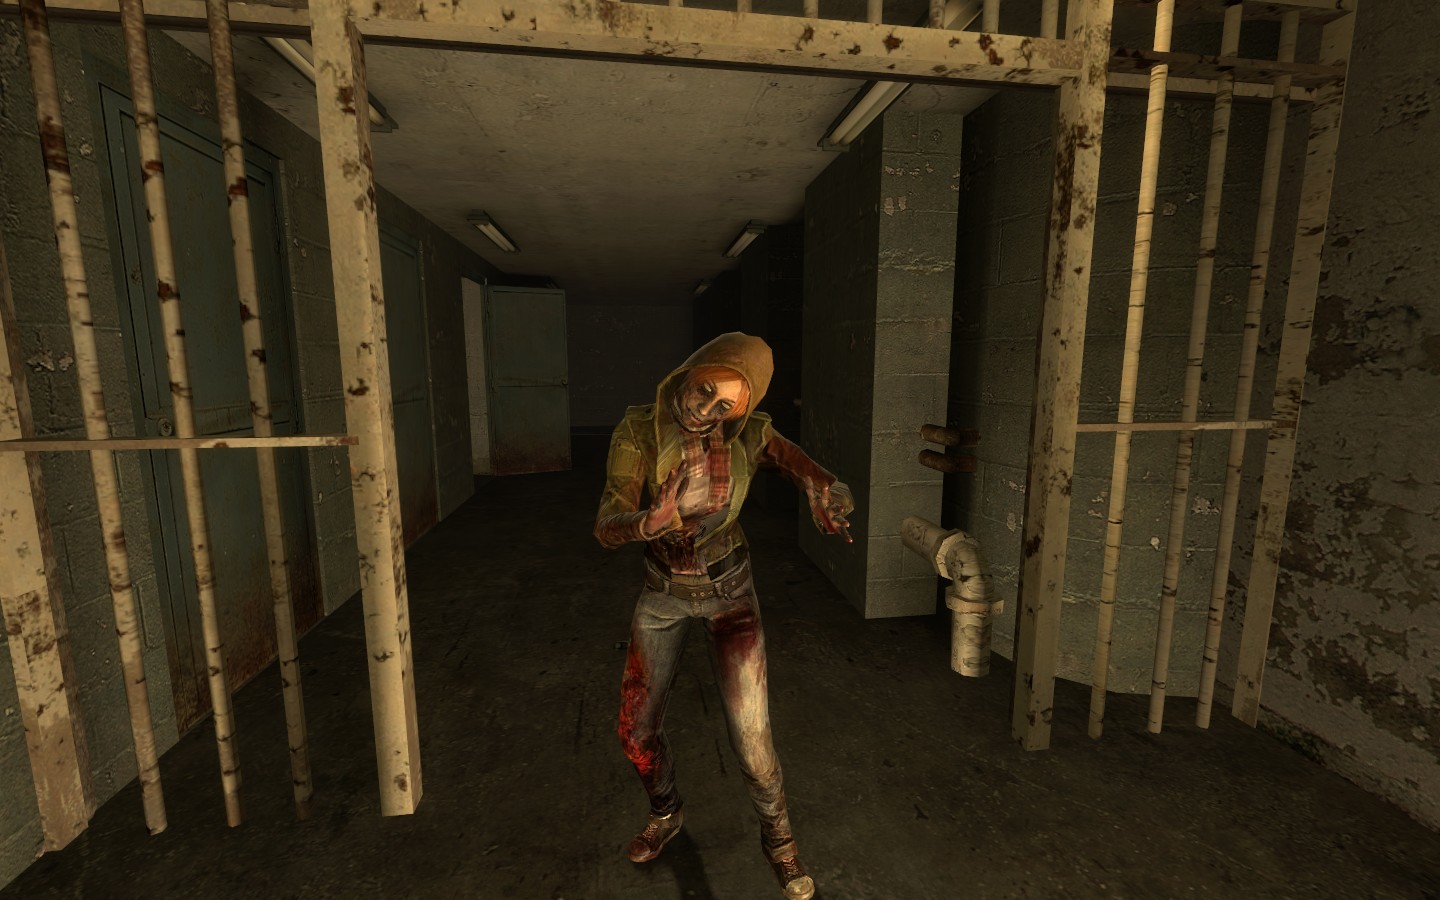 This month, the (free!) zombie apocalypse comes to PC (56k)